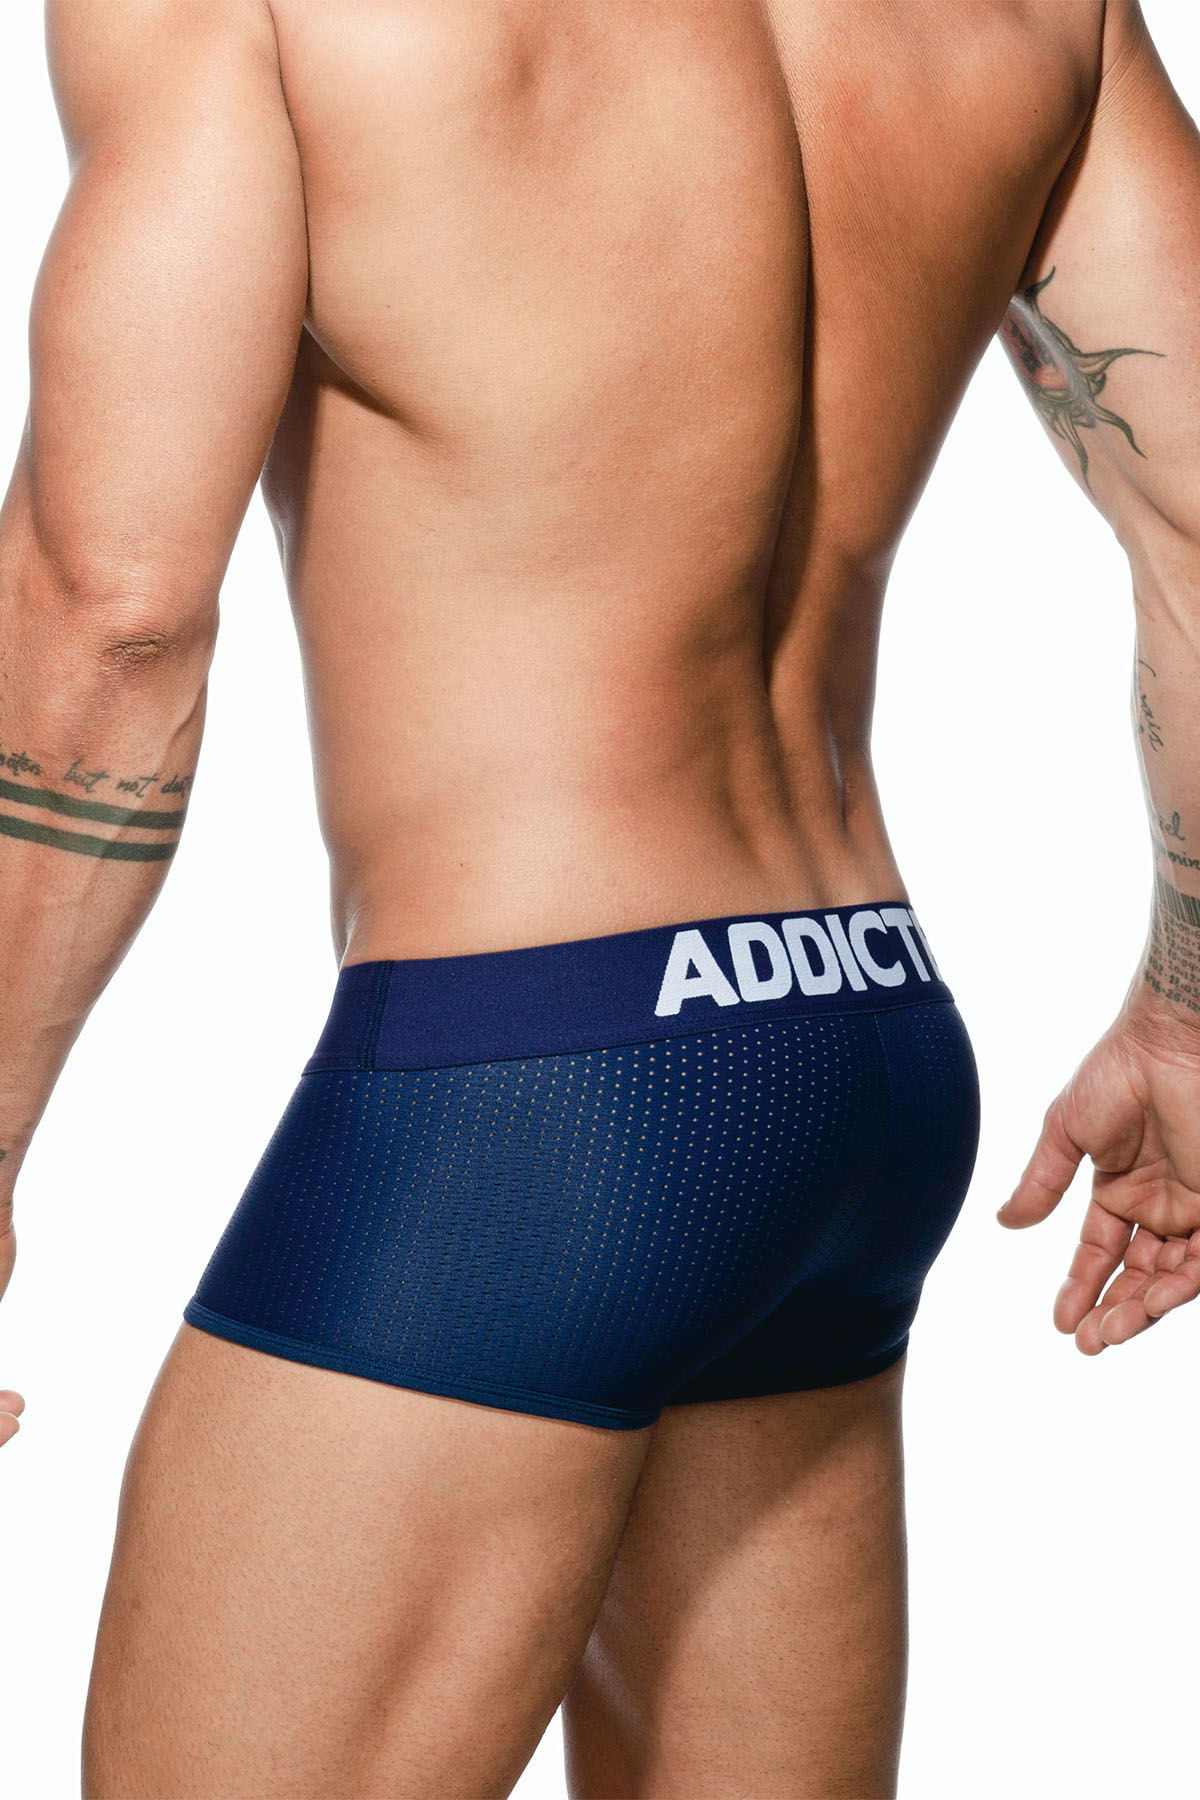 Addicted Sport thong with PUSH UP AD711 C-09 navy Masculo